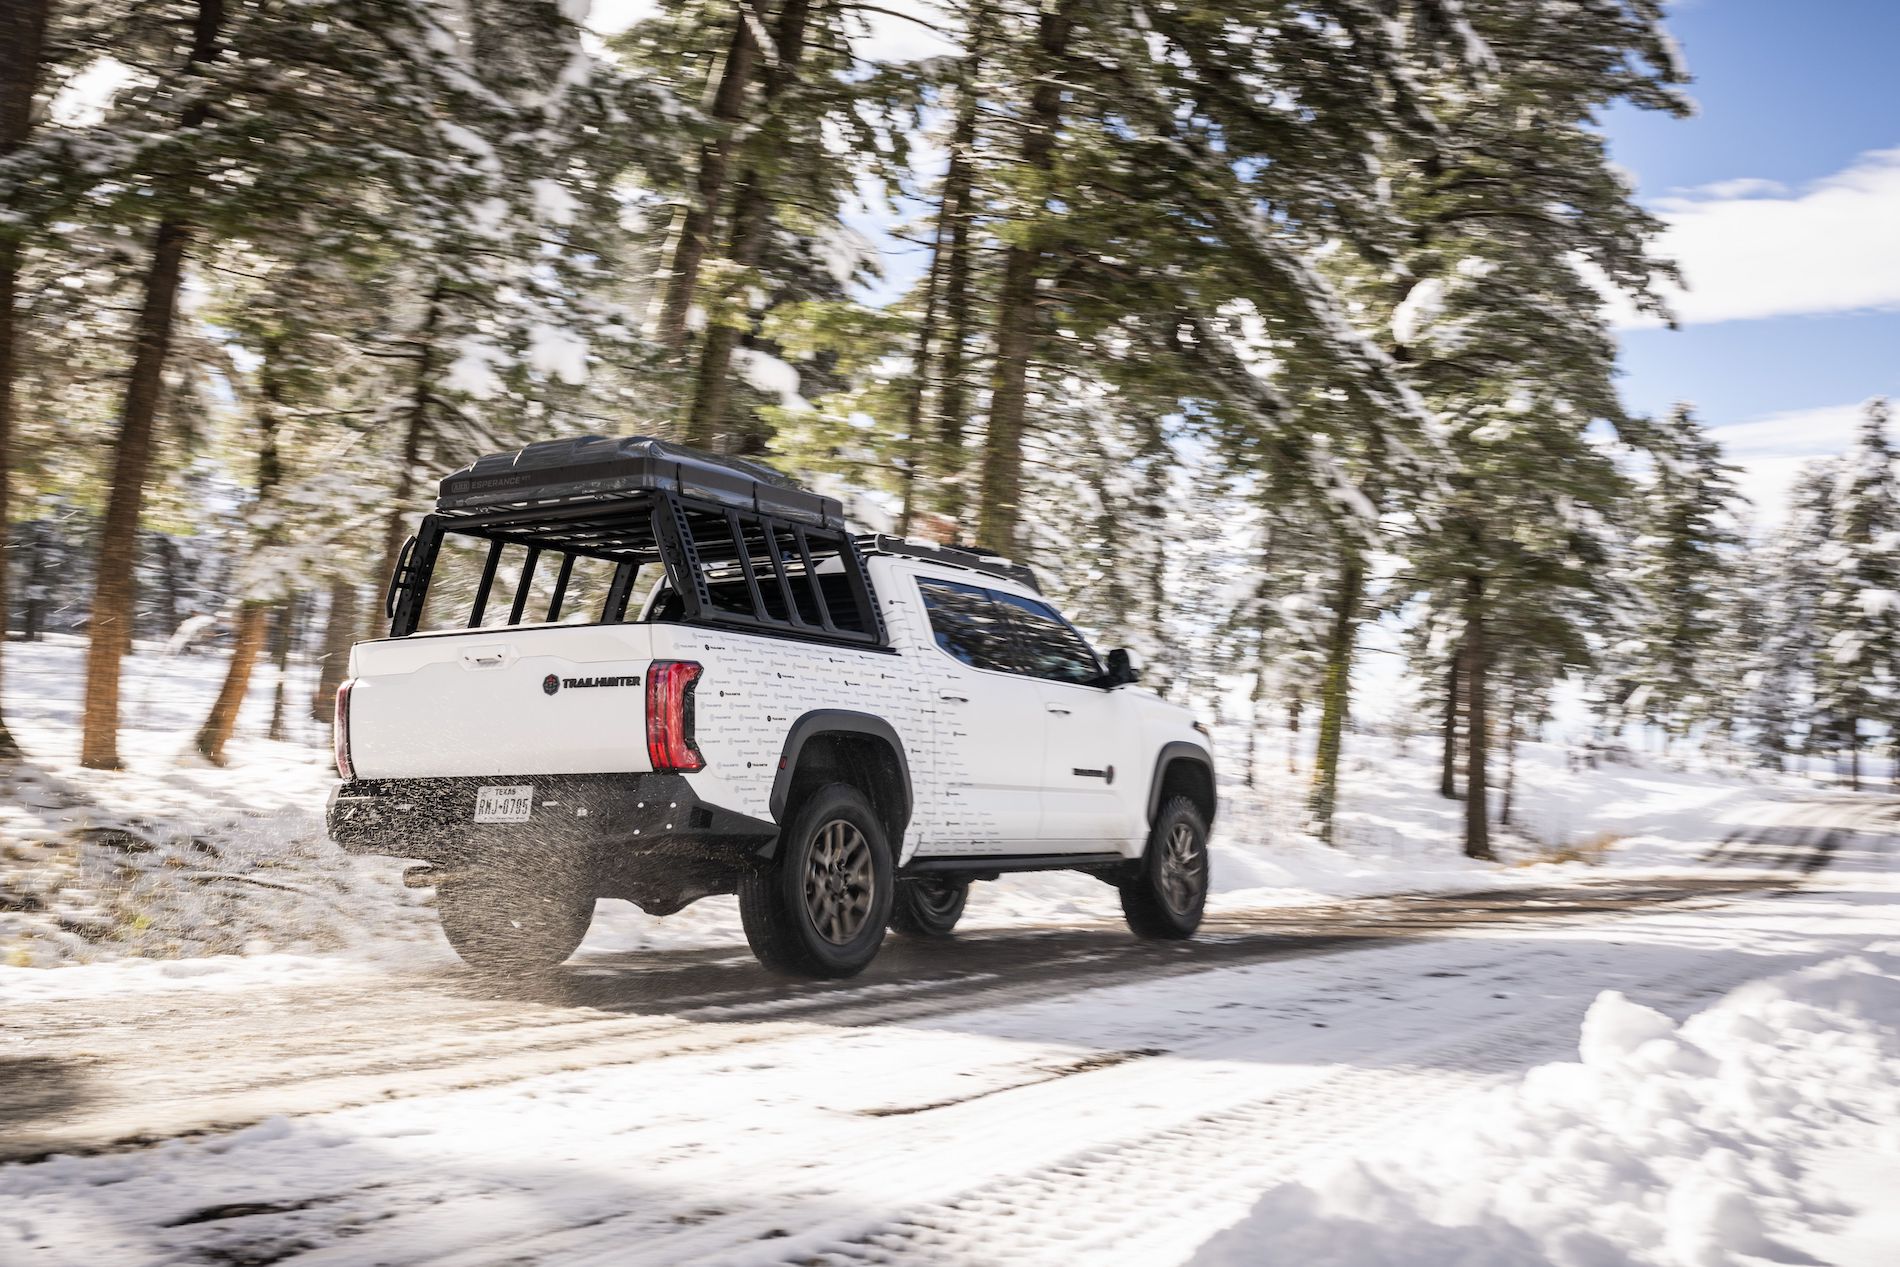 2024 Tacoma 2024 Trailhunter Tacoma (Overlanding Trim) Confirmed! Latest Teasers Released by Toyota trailhunter-concept-12-1667402533